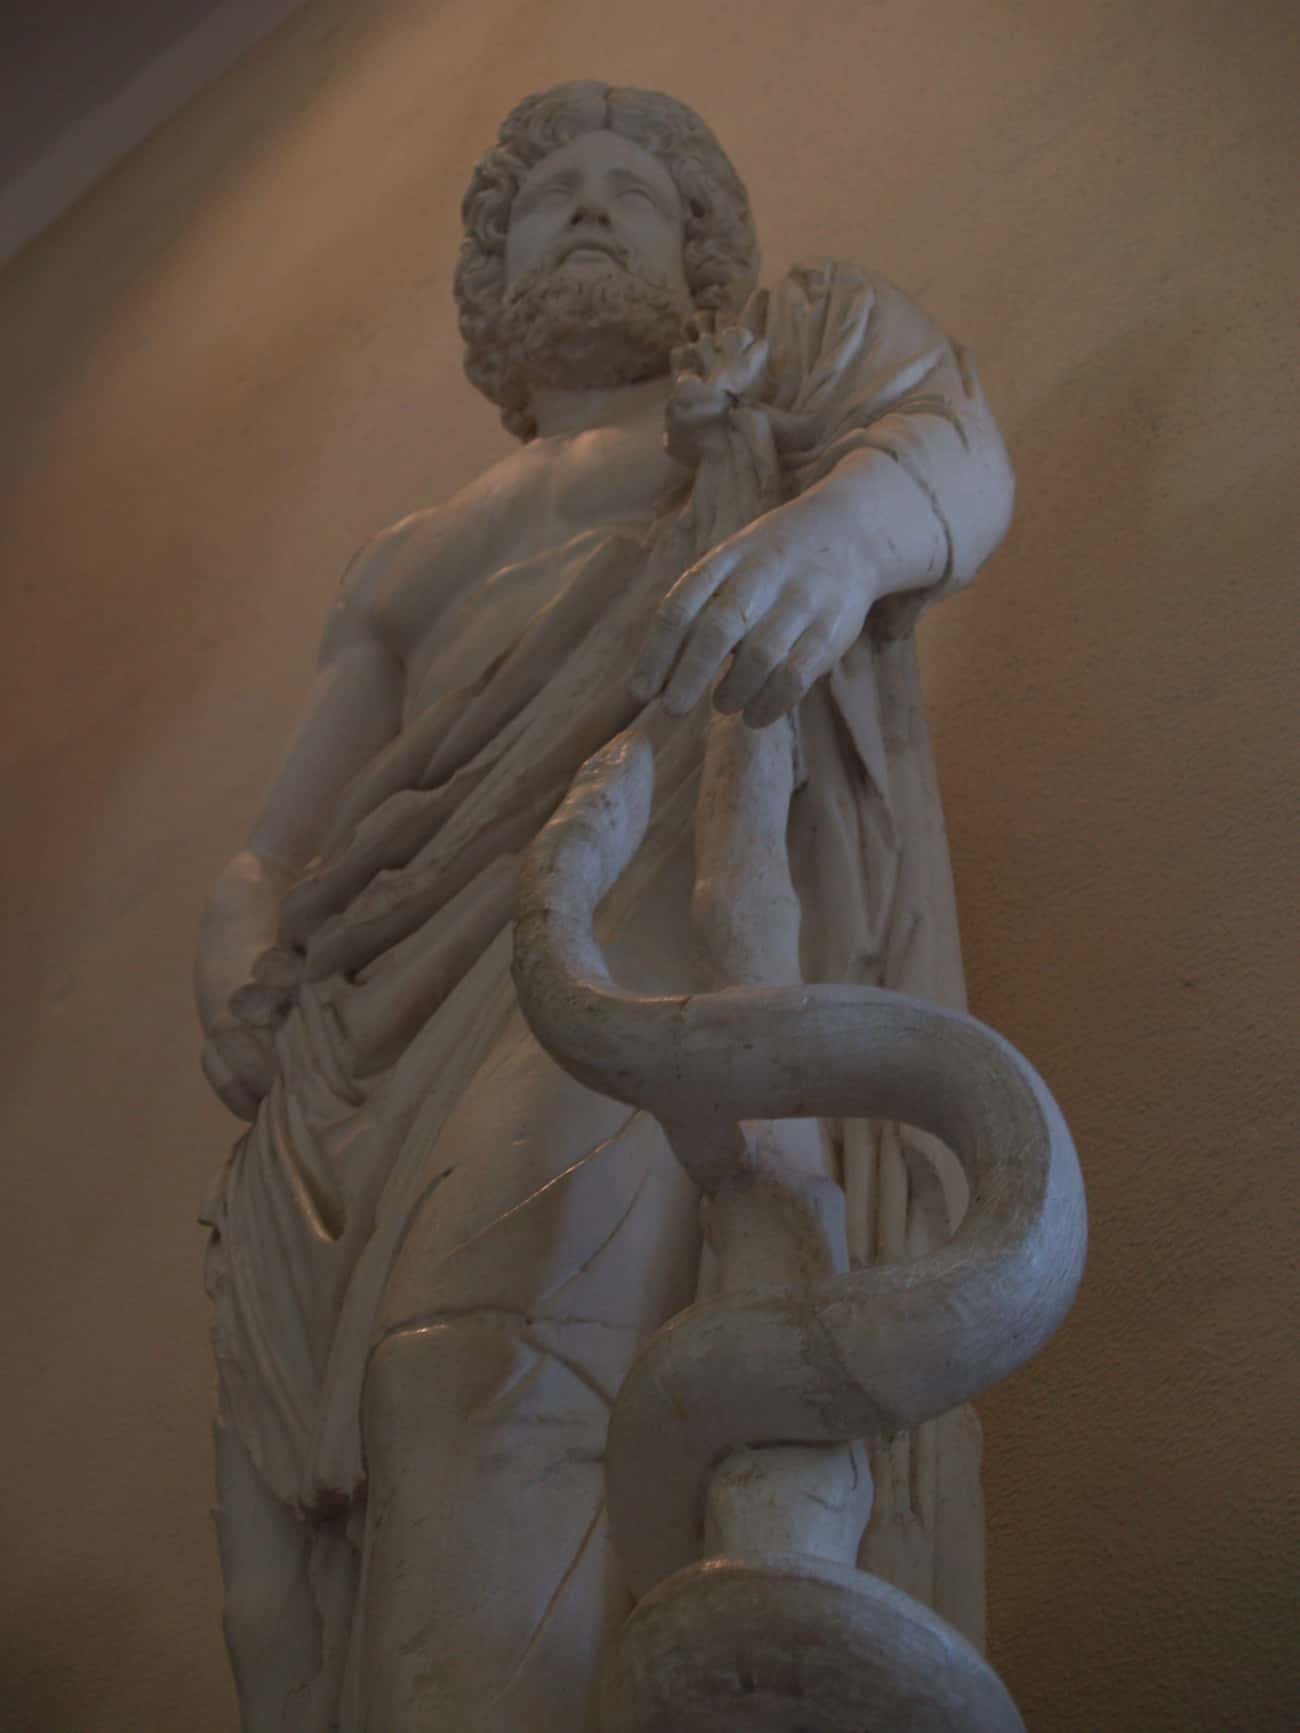 The Ancient Greeks Co-opted Him And Praised Him As Asclepius